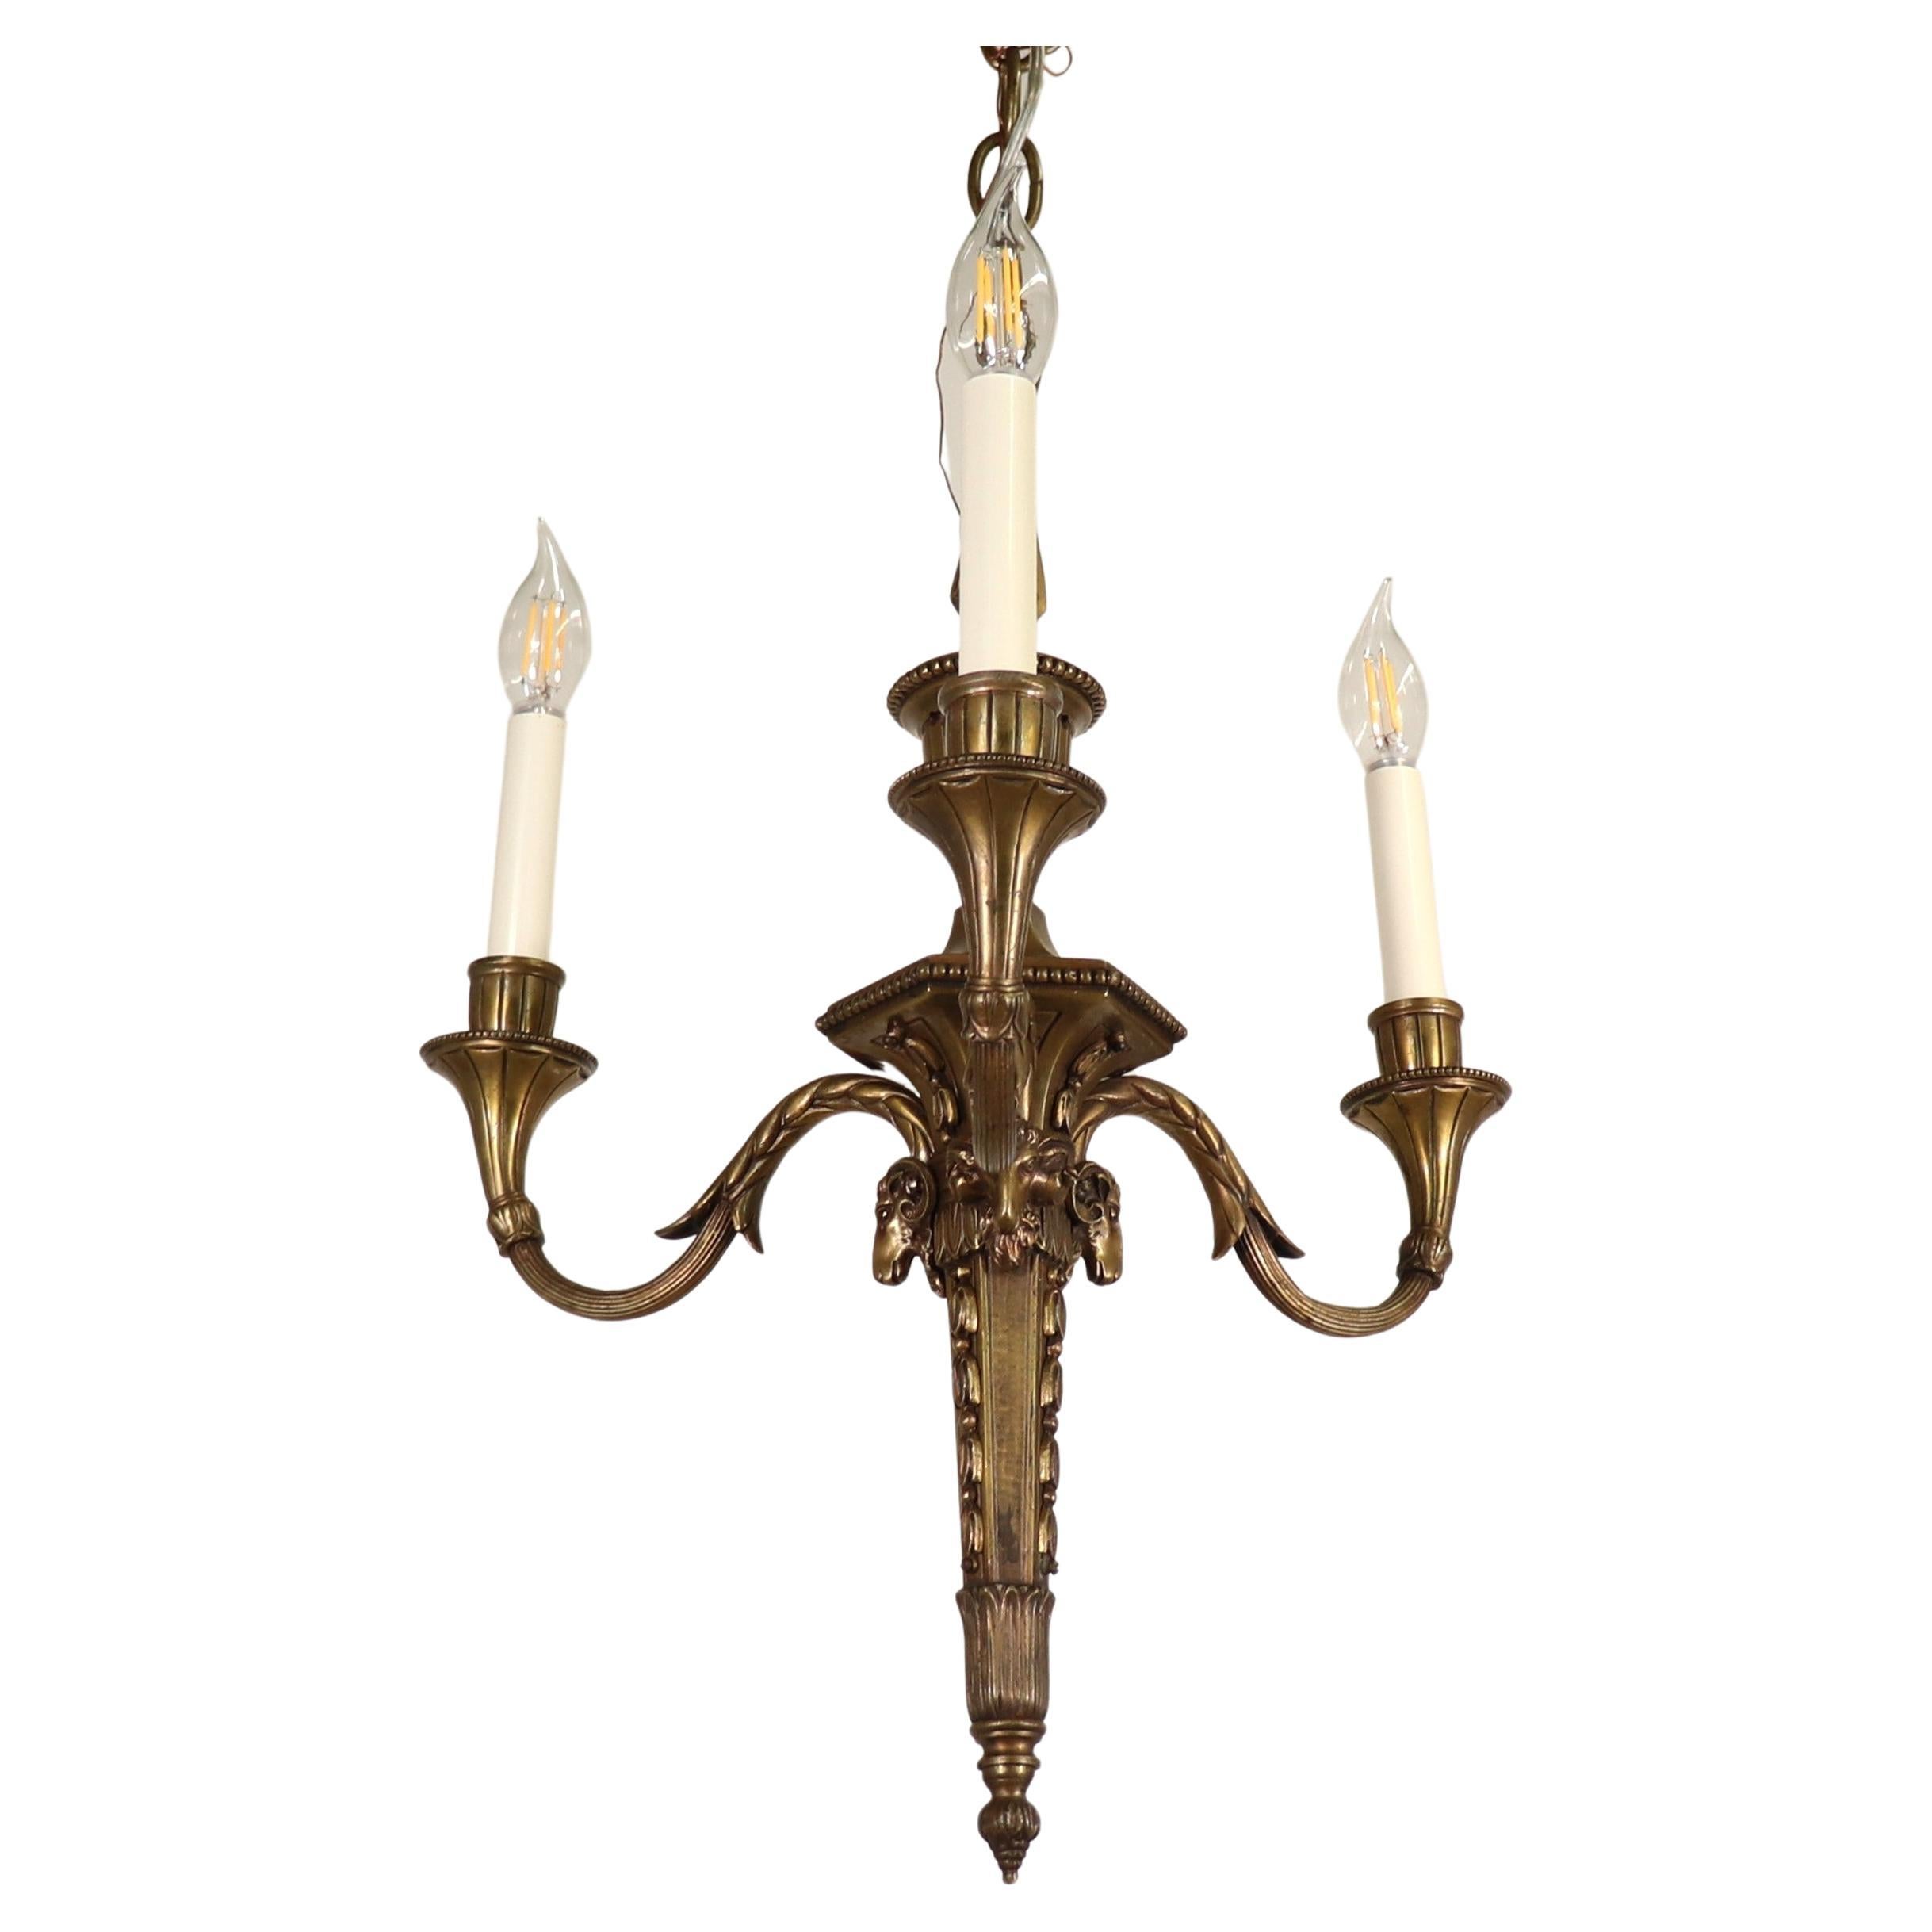 19th Century French Louis XVI Style Neoclassical Bronze Flambeau Chandelier